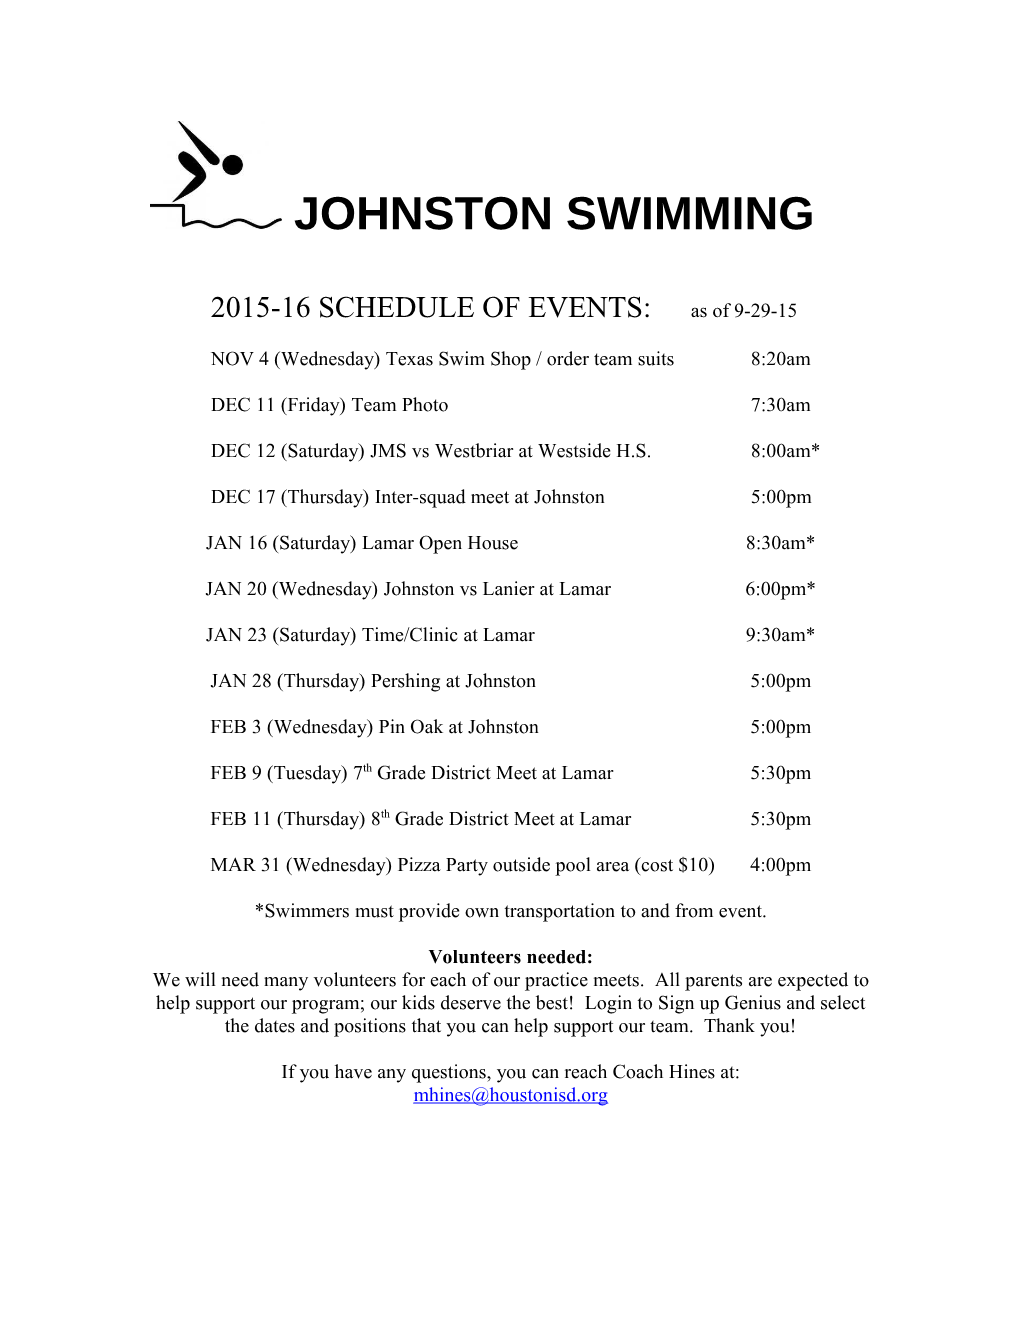 Johnston Swimming and Diving